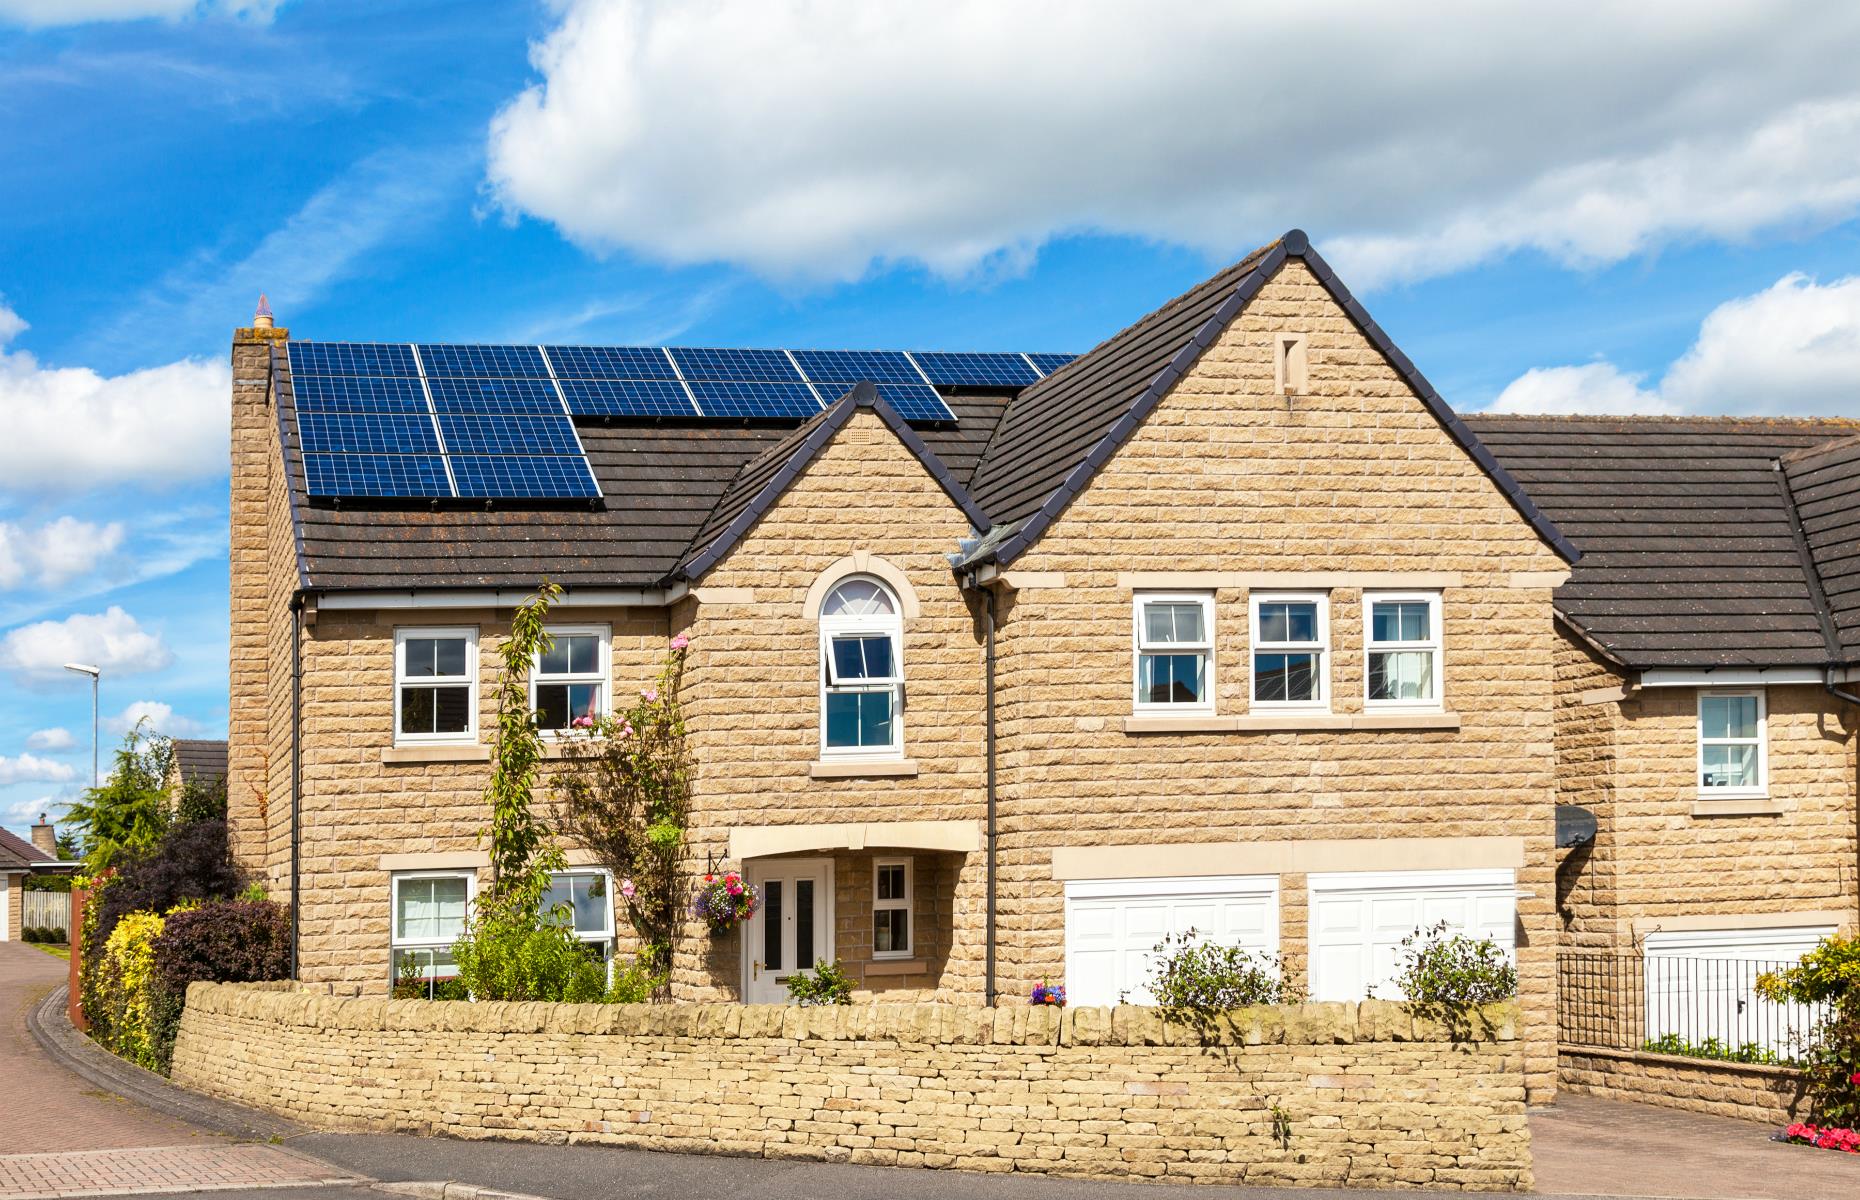 <p>Solar panels can help cut your carbon footprint and reduce your household electricity bills, which may be music to homeowners' ears given the current global energy crisis. Once you have paid for the installation, <a href="https://www.loveproperty.com/news/125020/how-much-do-solar-panels-cost">solar panels</a> need little maintenance and the latest models should last around 30 years.</p>